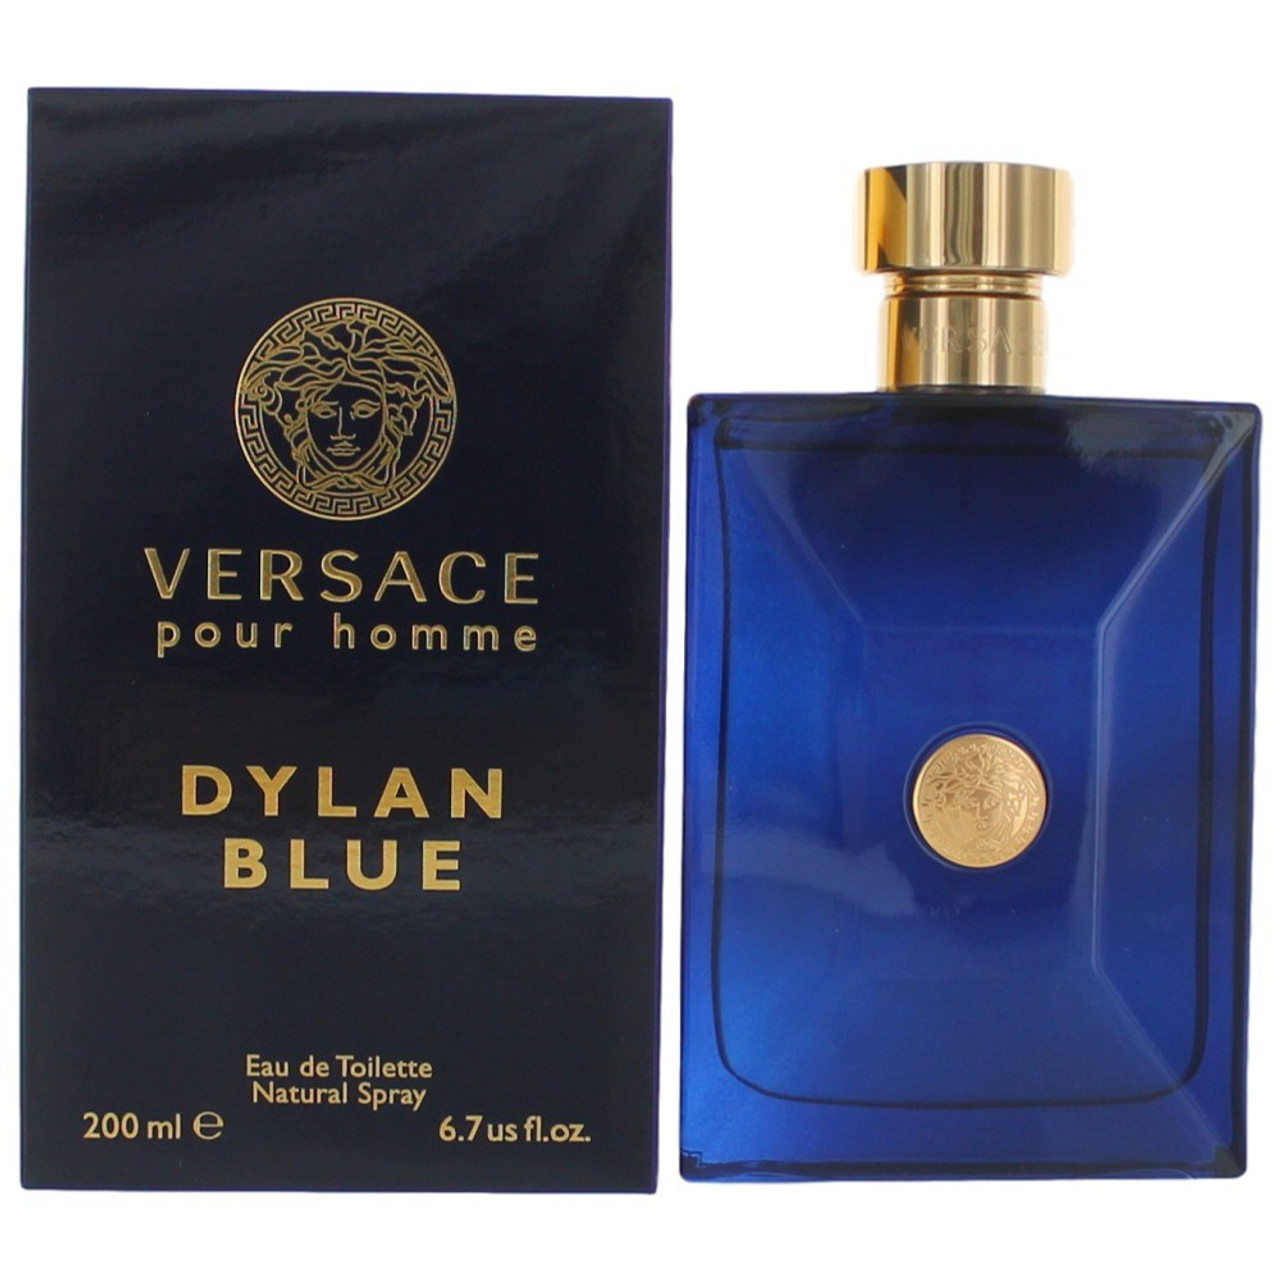 Versace Pour Homme Dylan Blue by Versace, 6.7 oz EDT Spray for Men